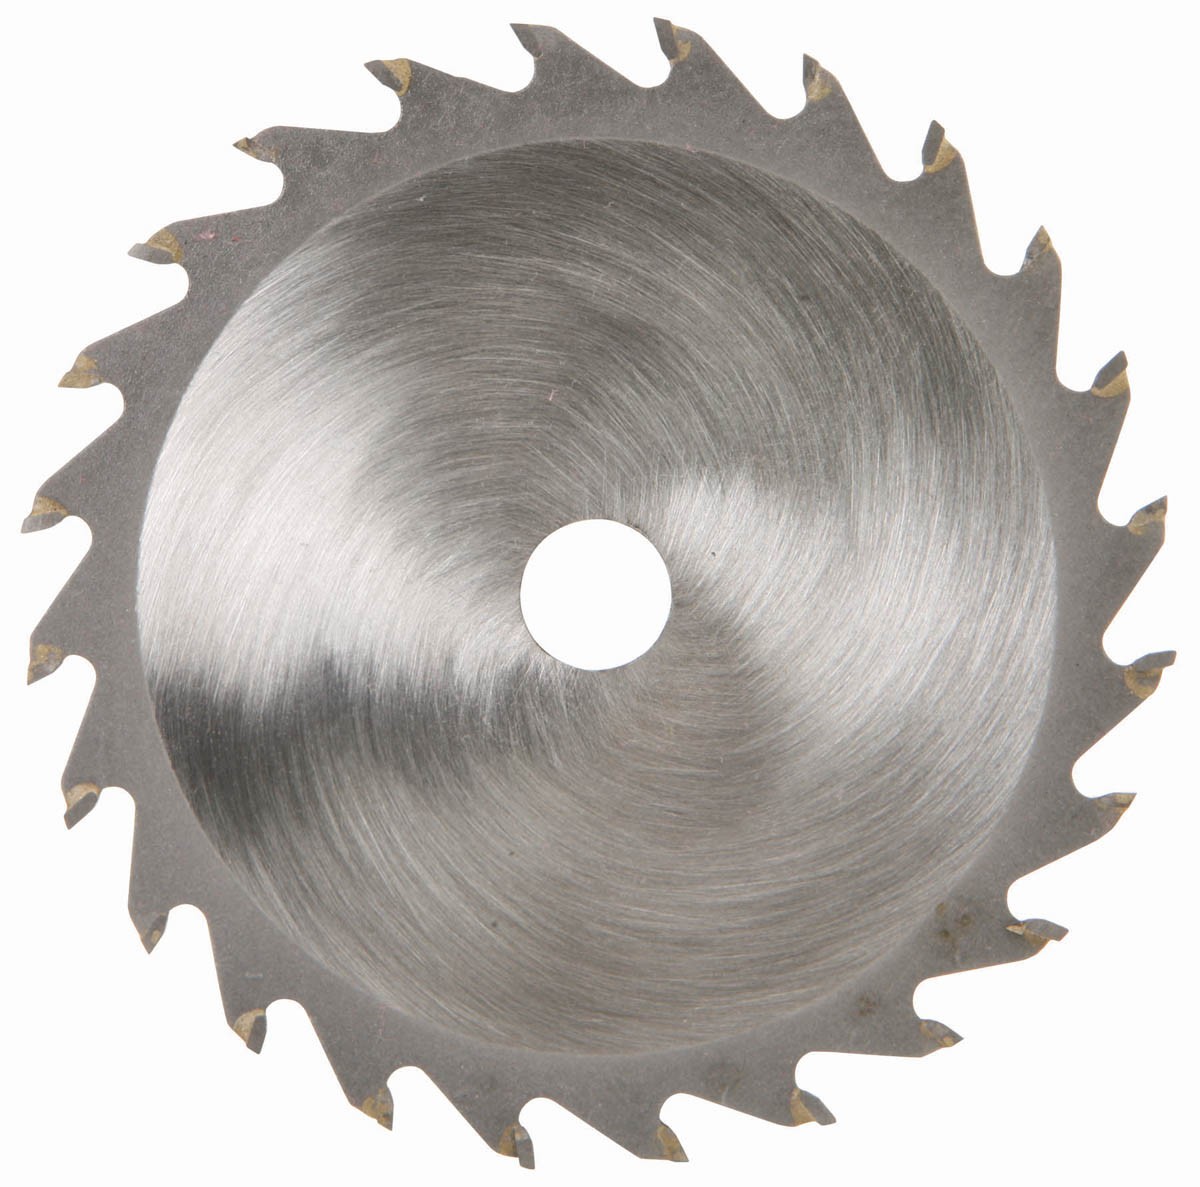 saw blade clipart cliparts library hand